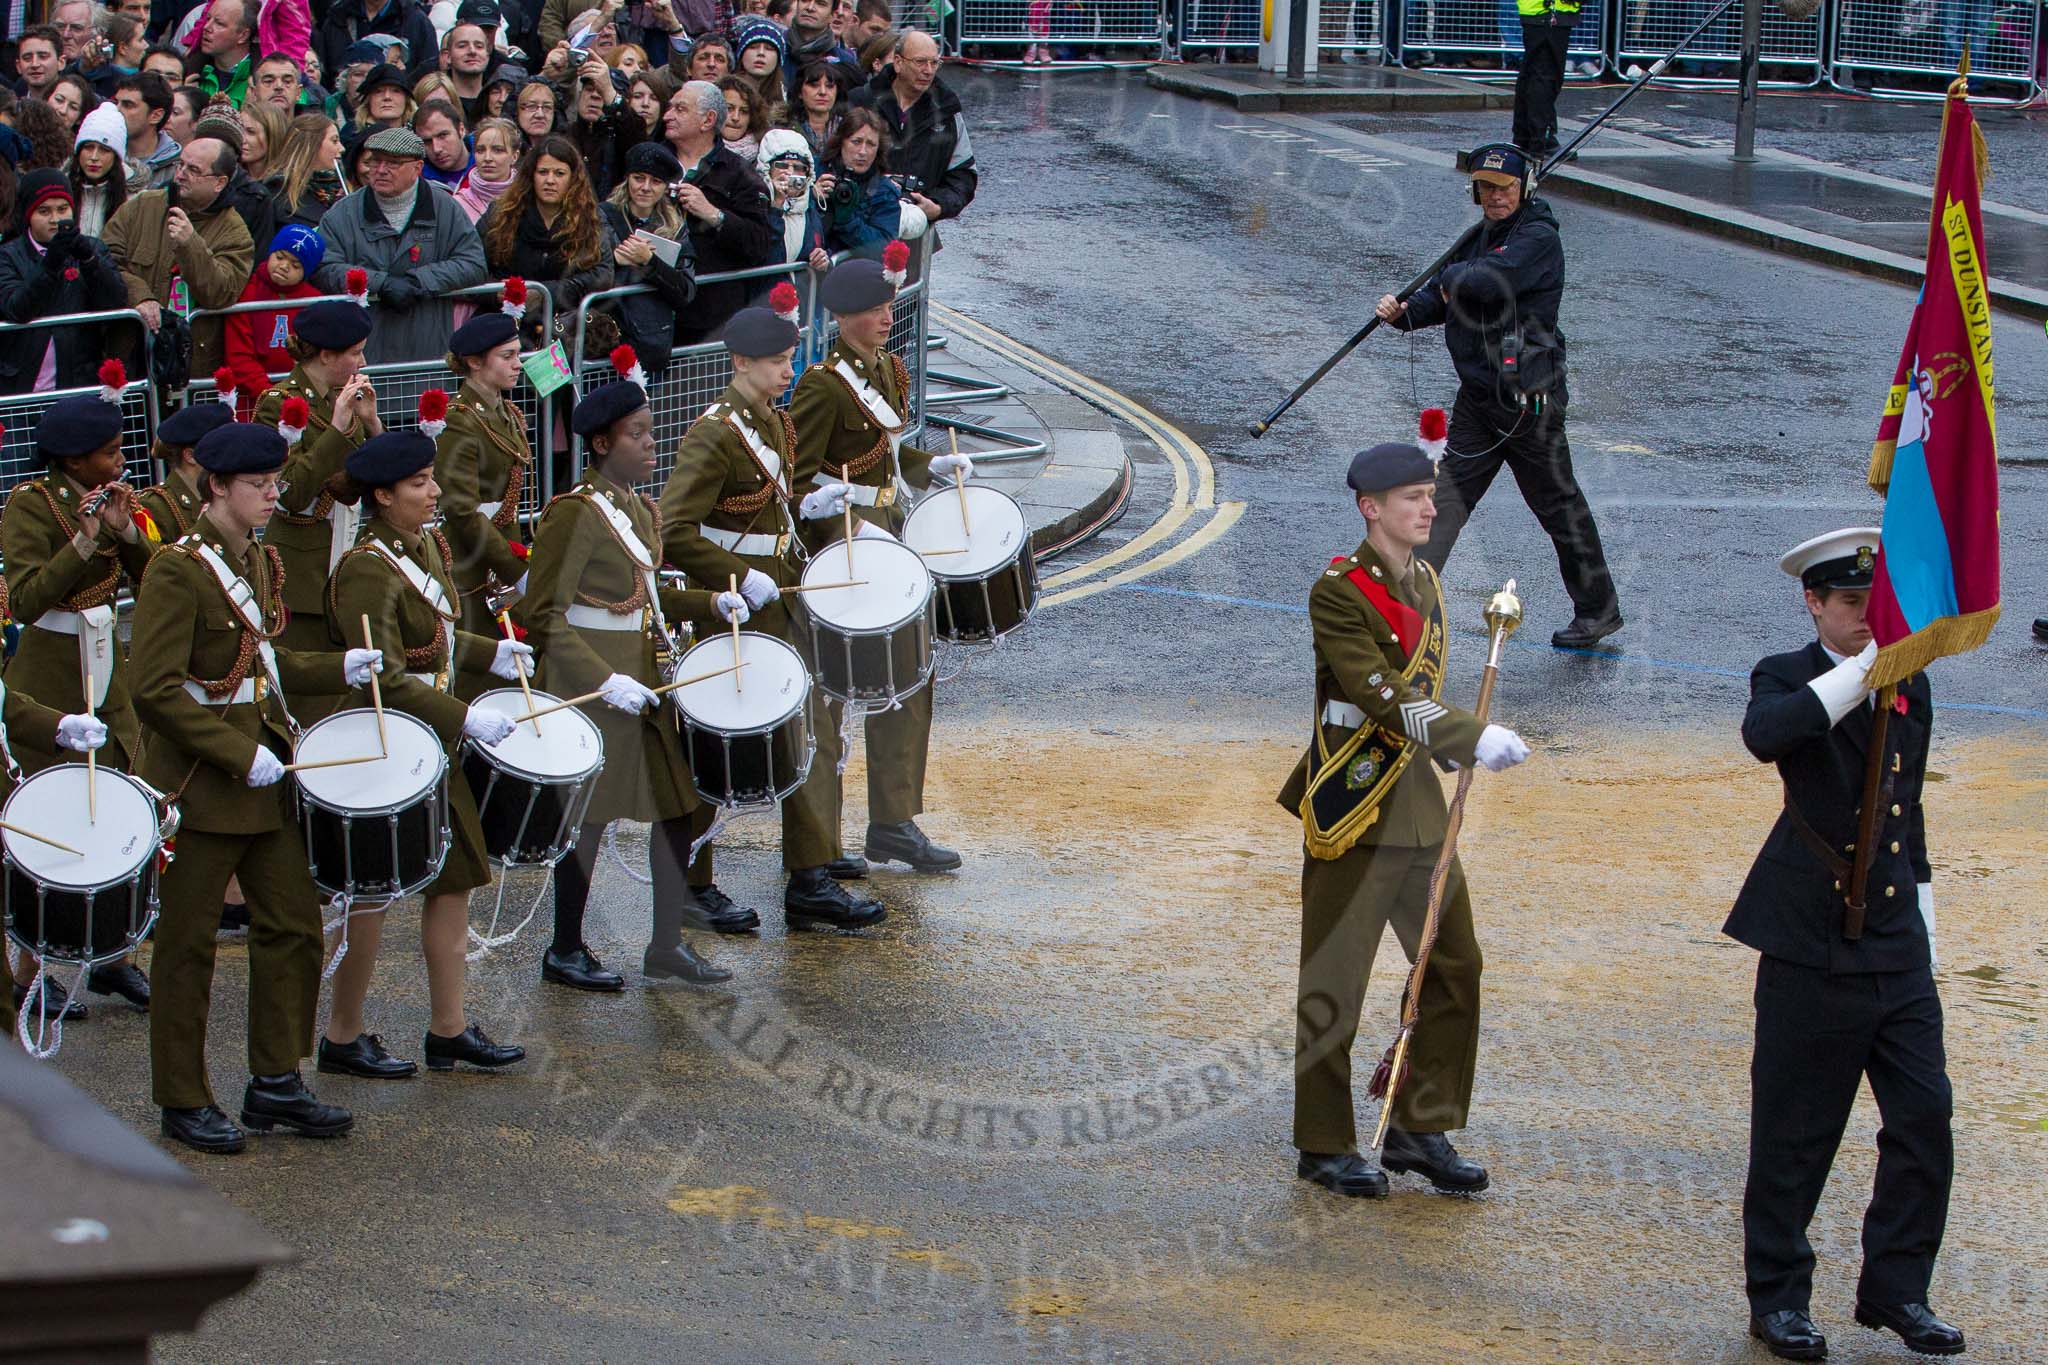 Lord Mayor's Show 2012: Entry 54 - St Dunstan’s CCF Band - the St Dunstan 's College Combined Cadet Force..
Press stand opposite Mansion House, City of London,
London,
Greater London,
United Kingdom,
on 10 November 2012 at 11:24, image #716